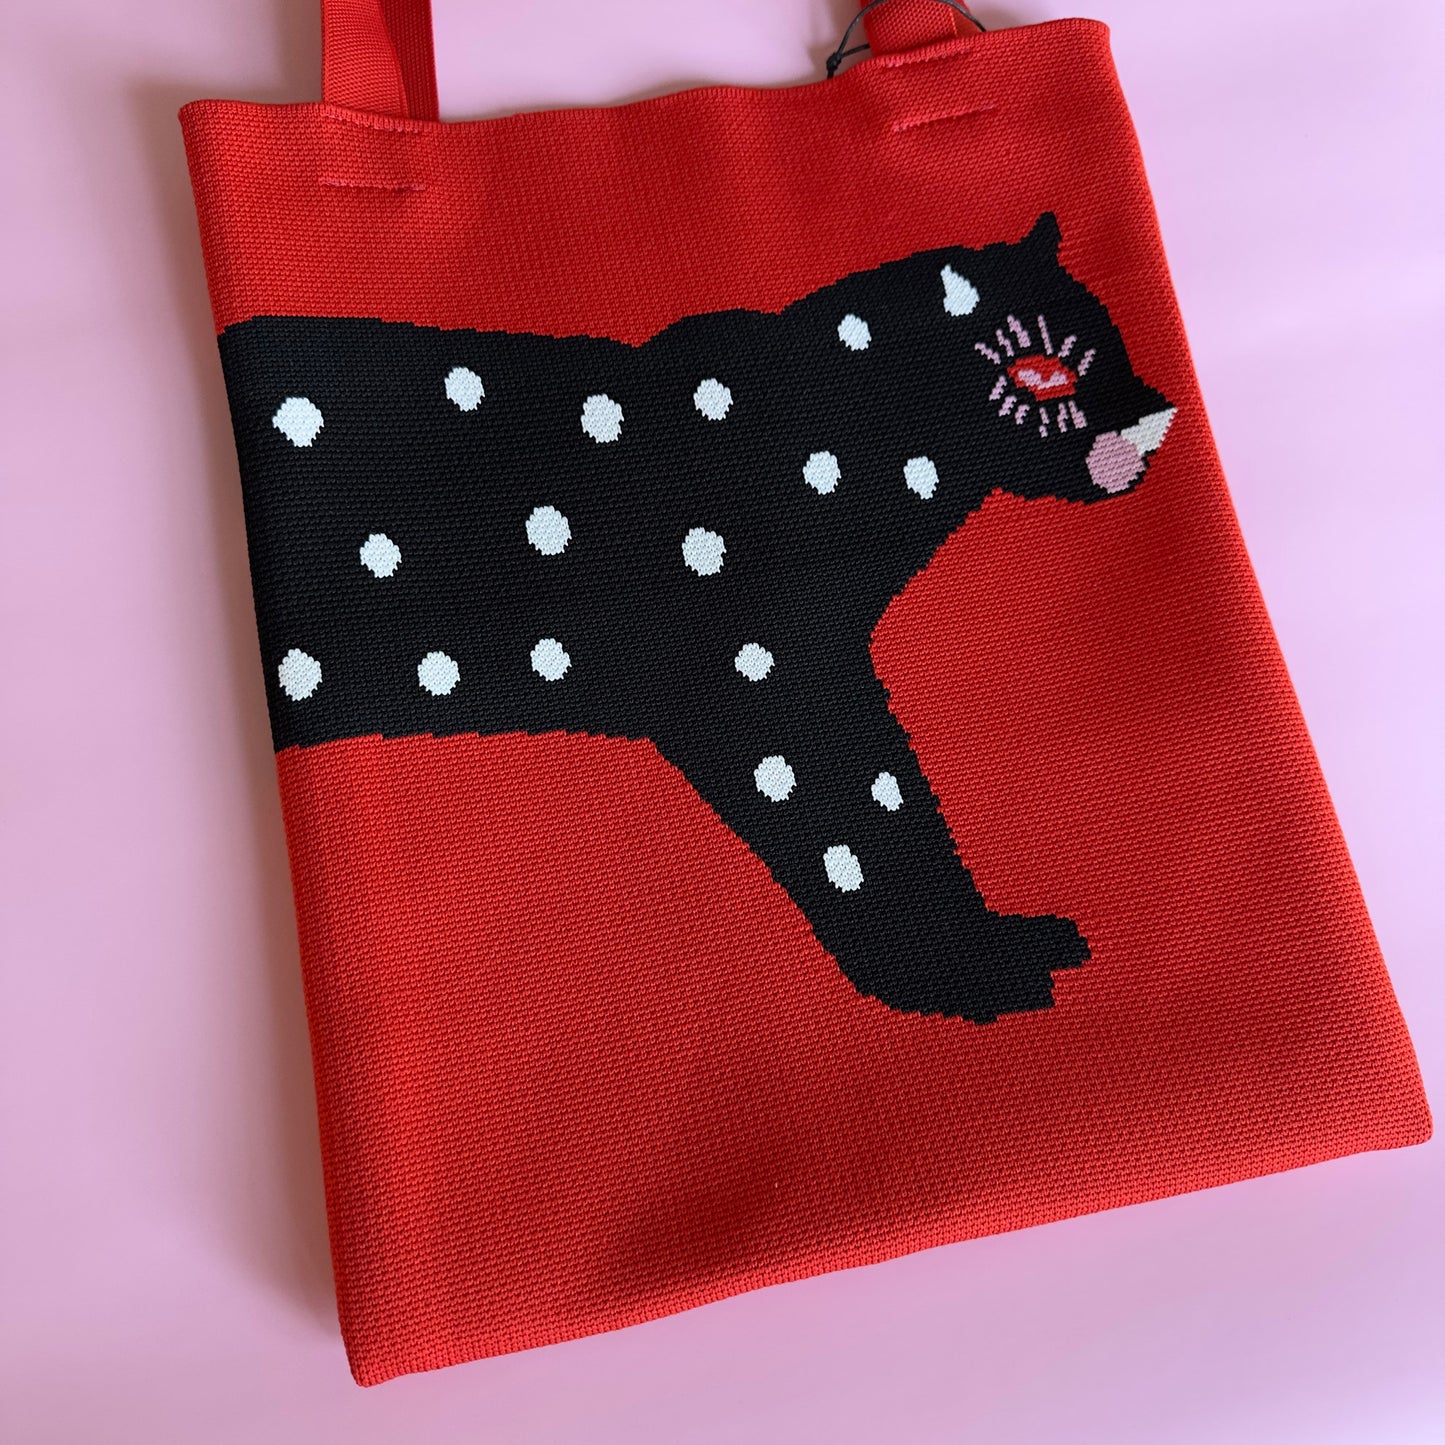 polka cat with polka dots knit tote bag in red and black